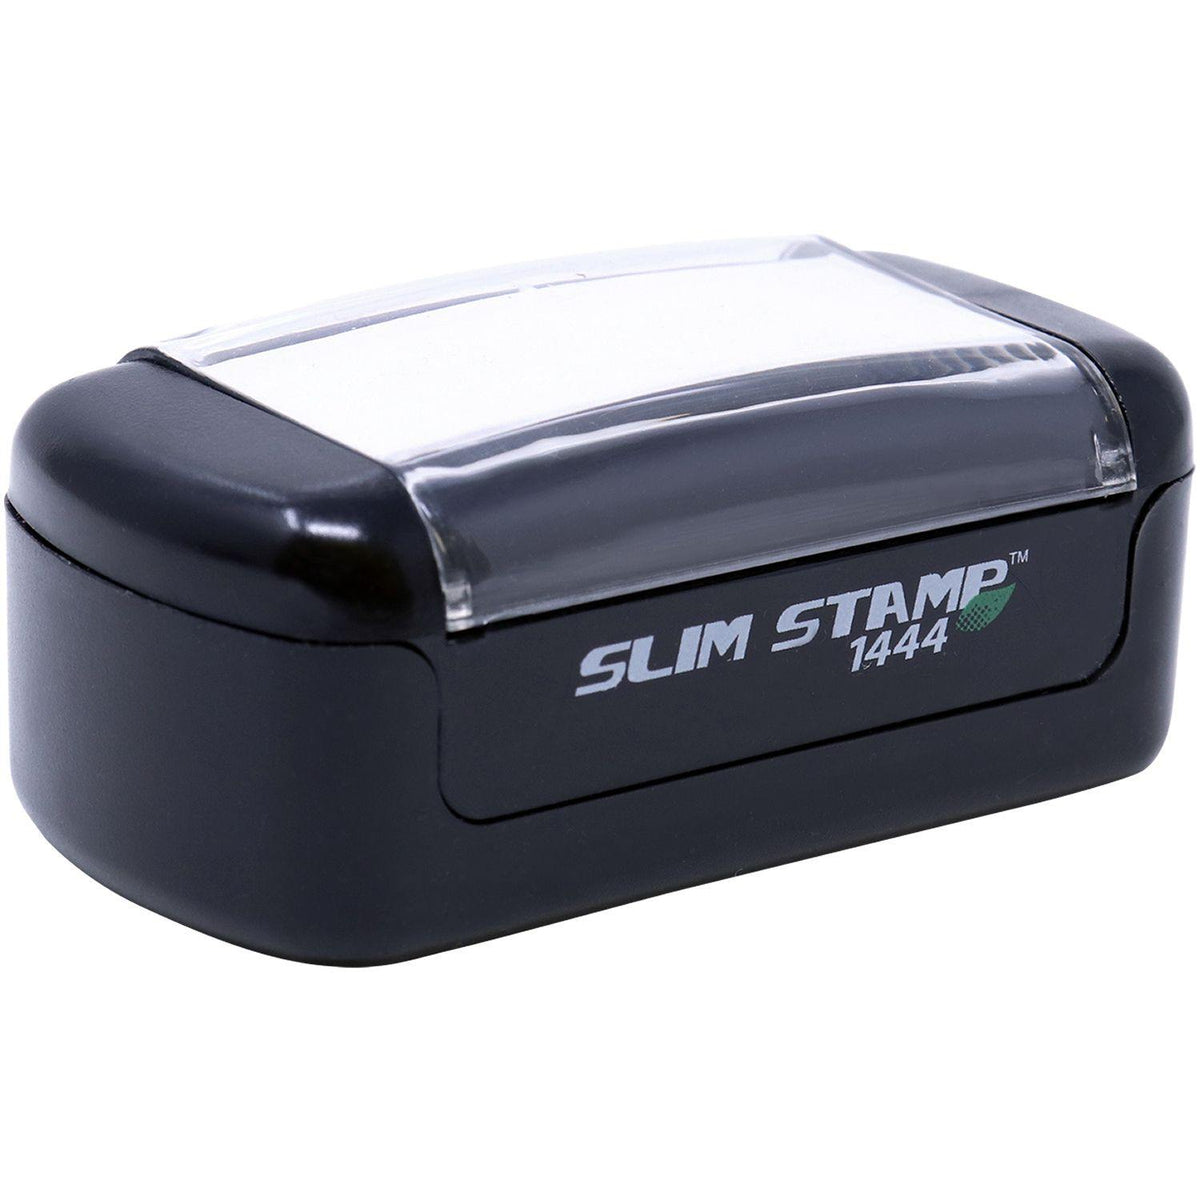 Alt View of Slim Pre-Inked Times Faxed Stamp Mount Angle